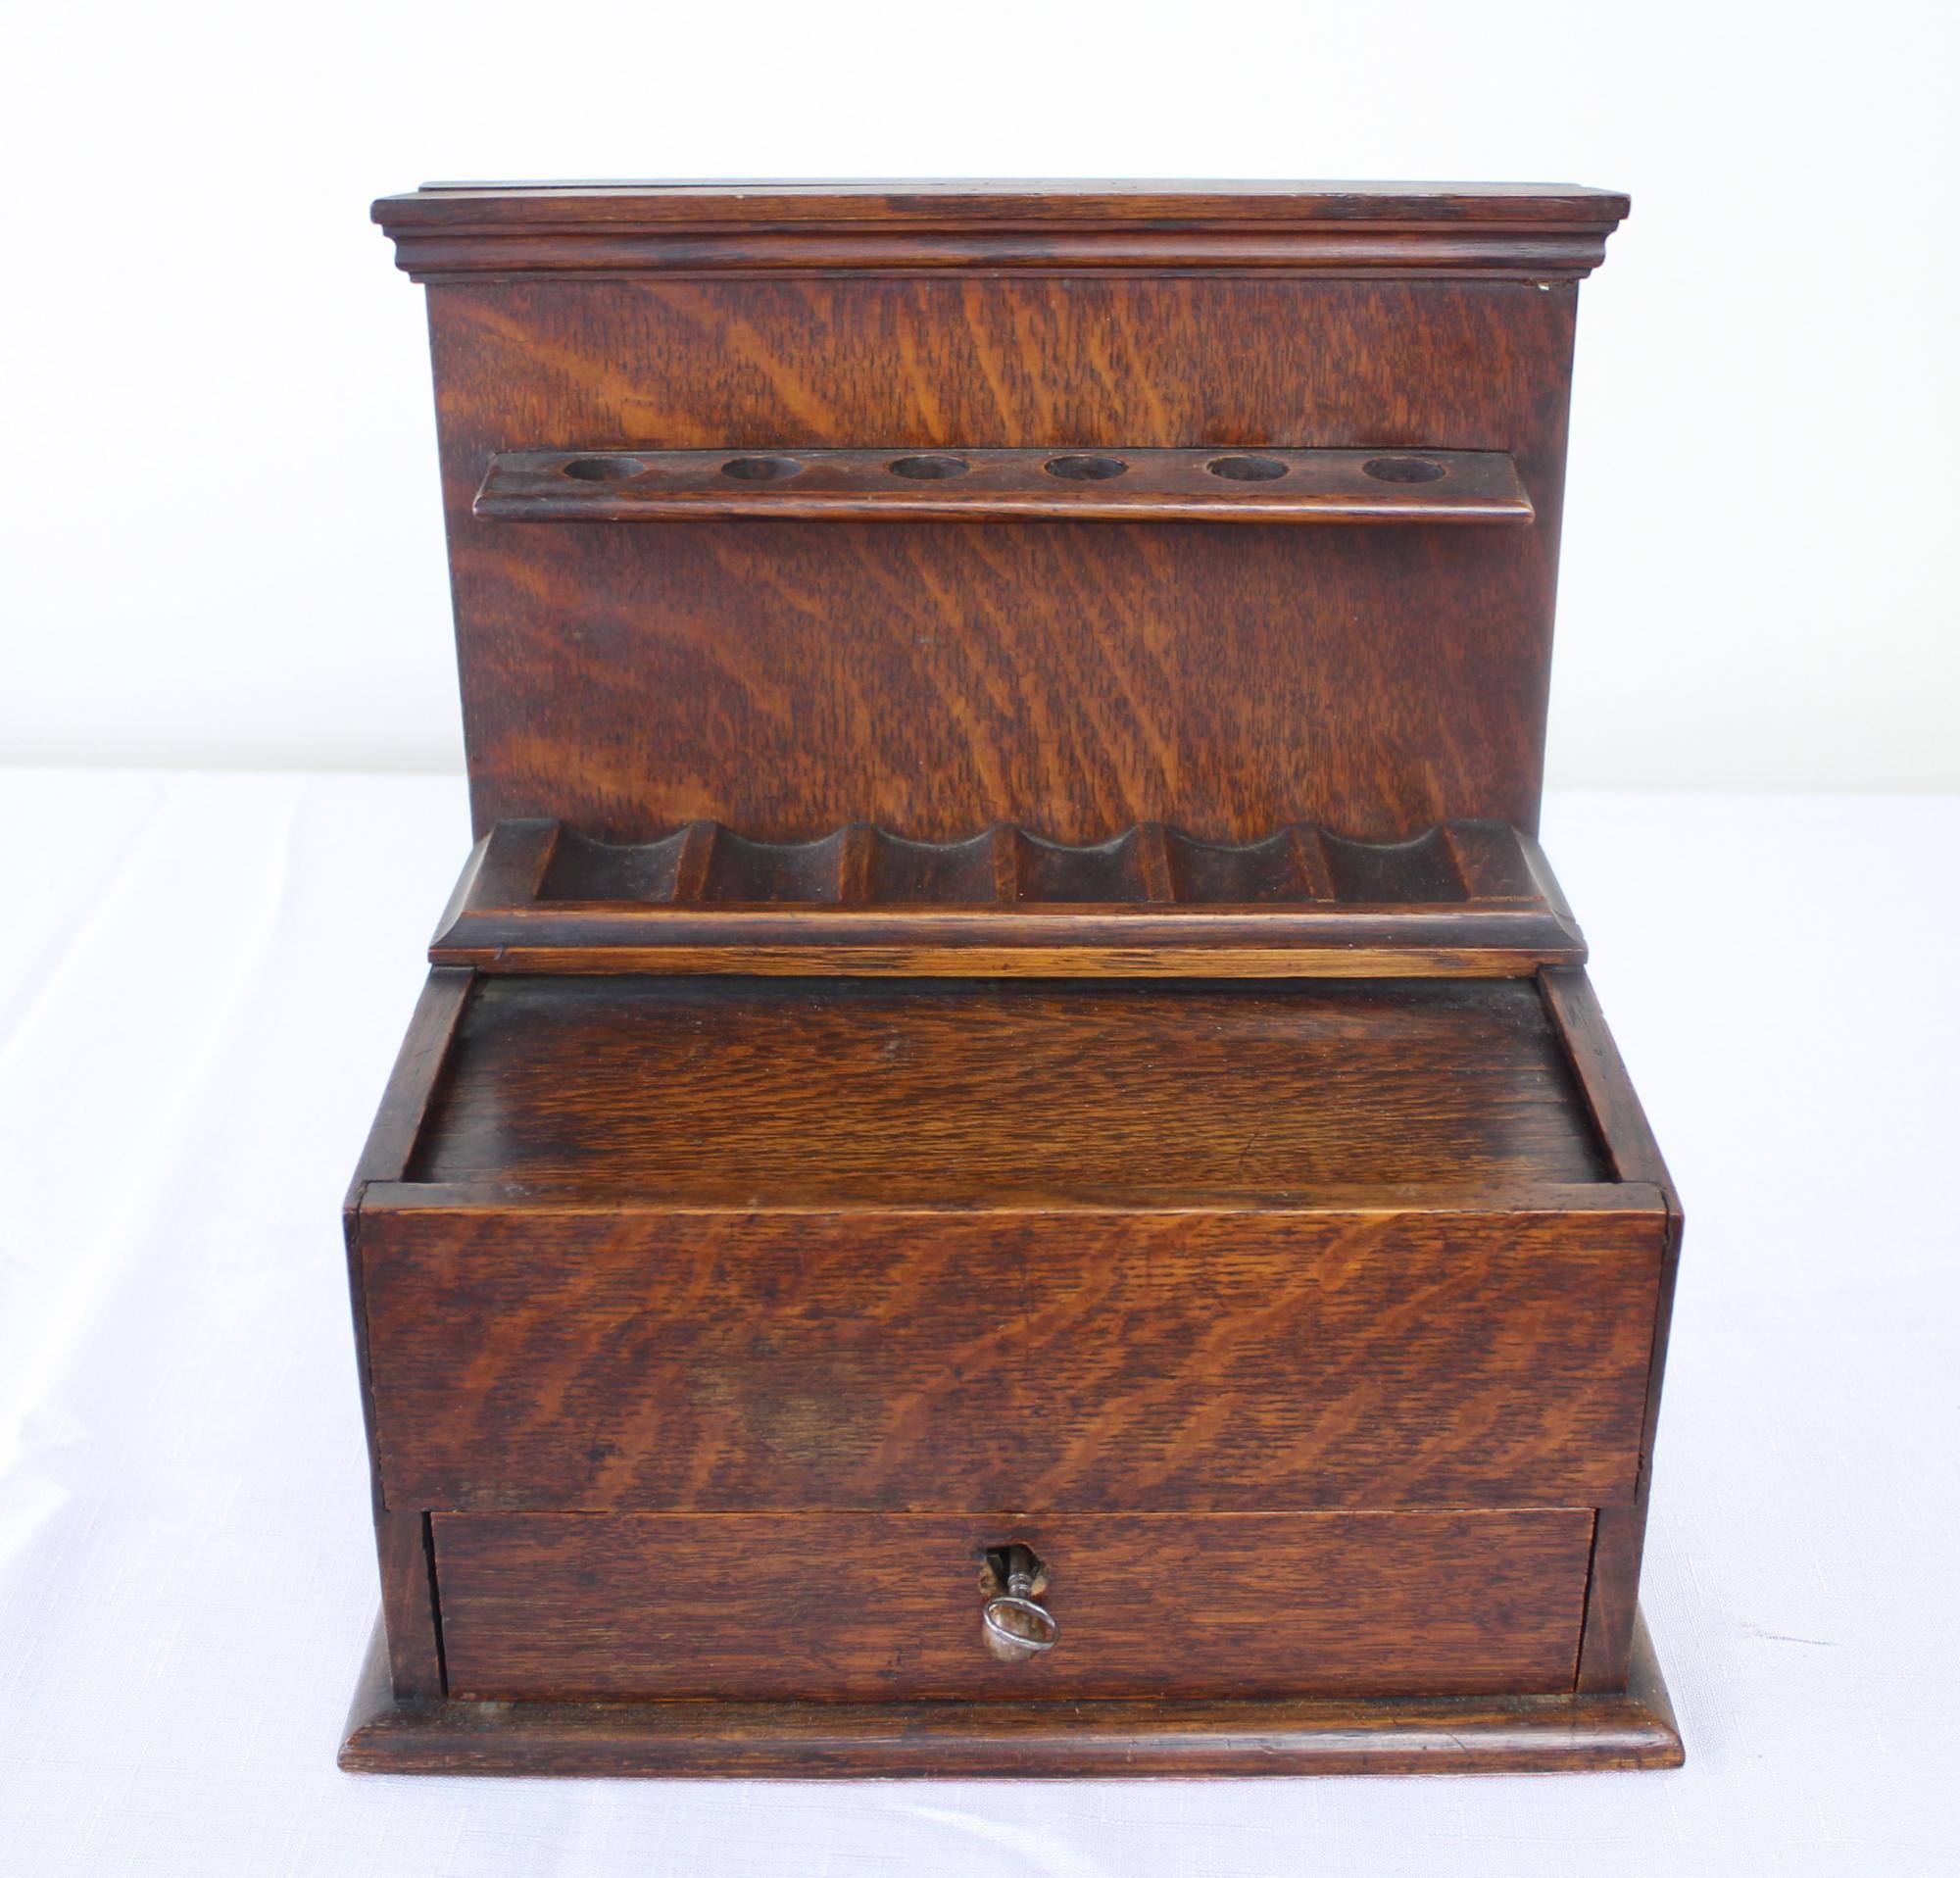 A finely detailed English oak smoking box. At the top are six charming holes for pipes, while the drawer below, with working key, opens to reveal several compartments for cigarettes and accessories. The pull action of the drawer simultaneously opens